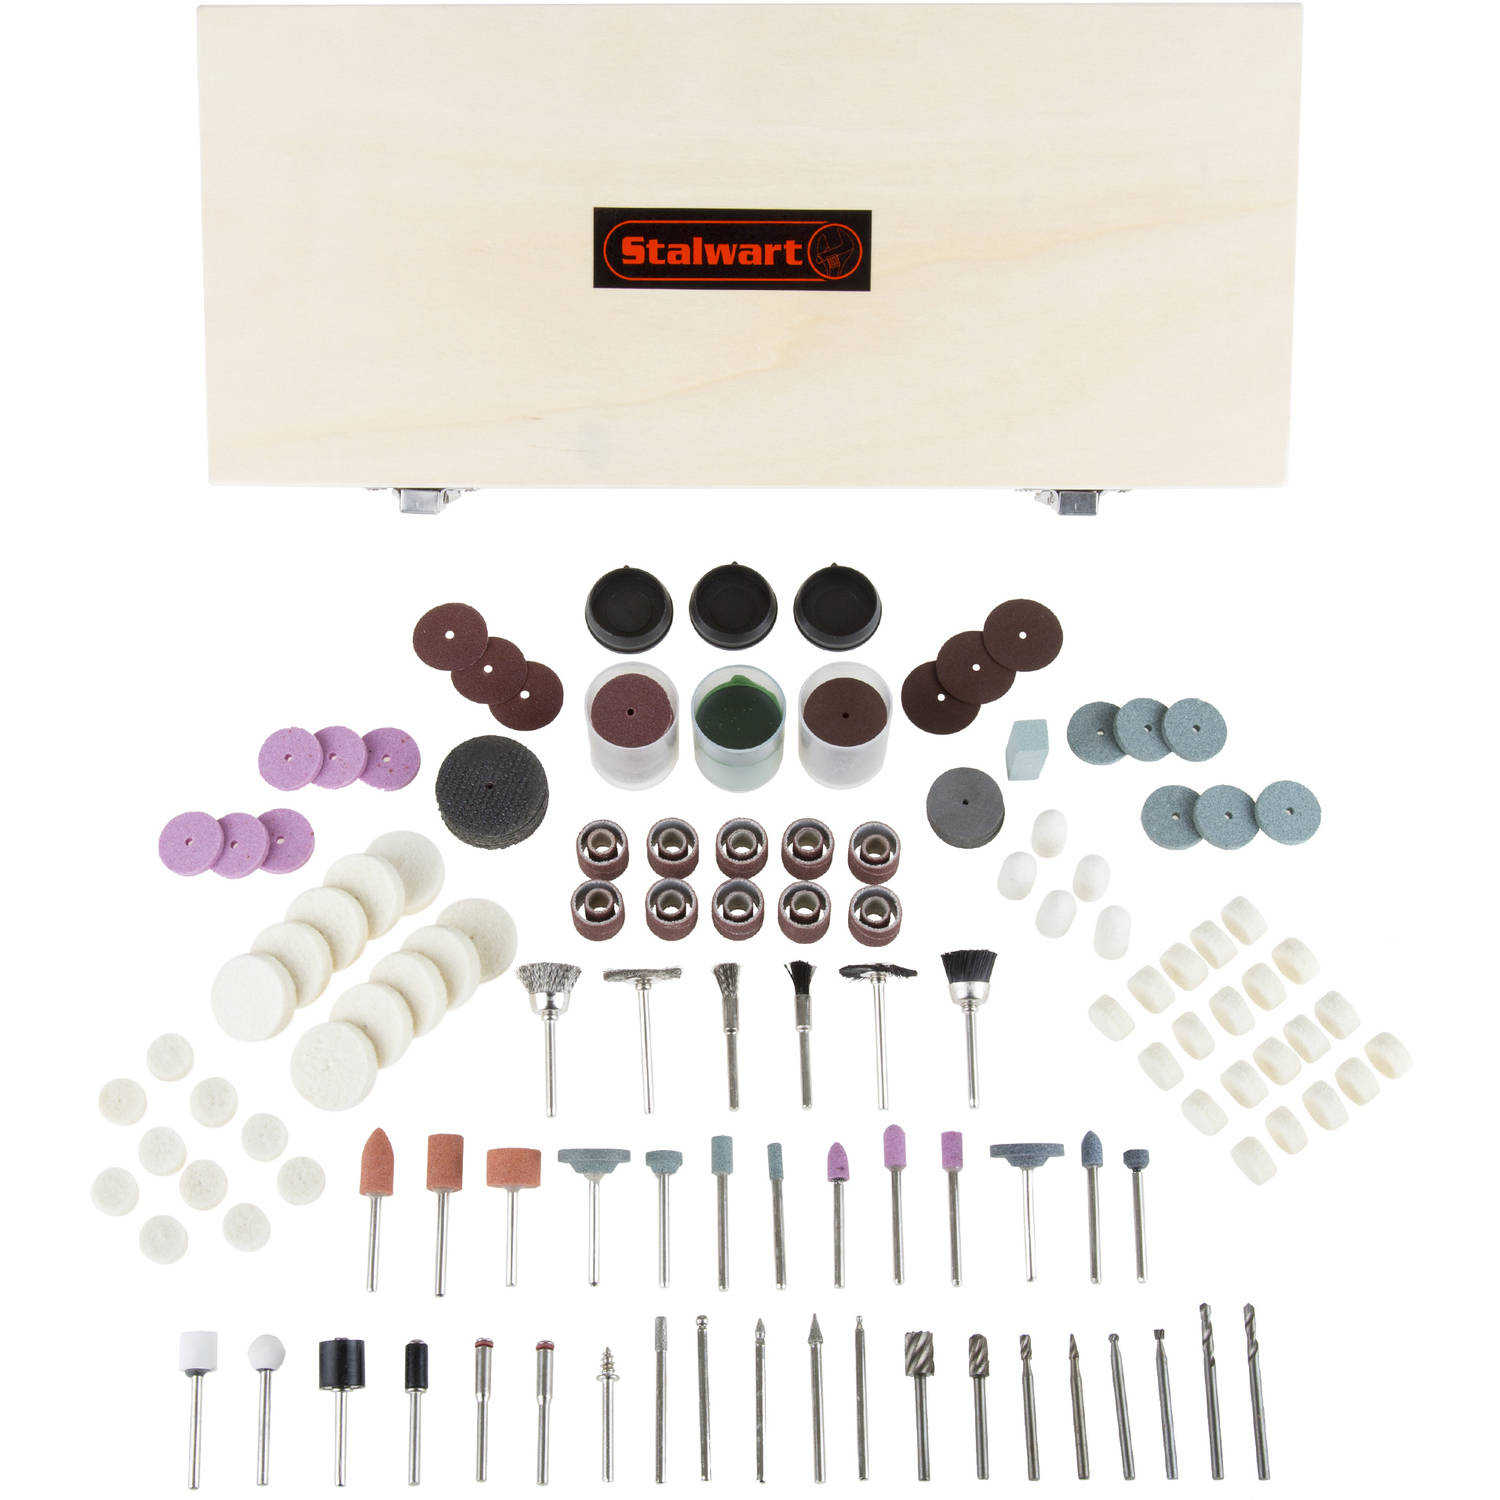 Stalwart 228-Piece Rotary Tool Accessories Kit in Wooden Case